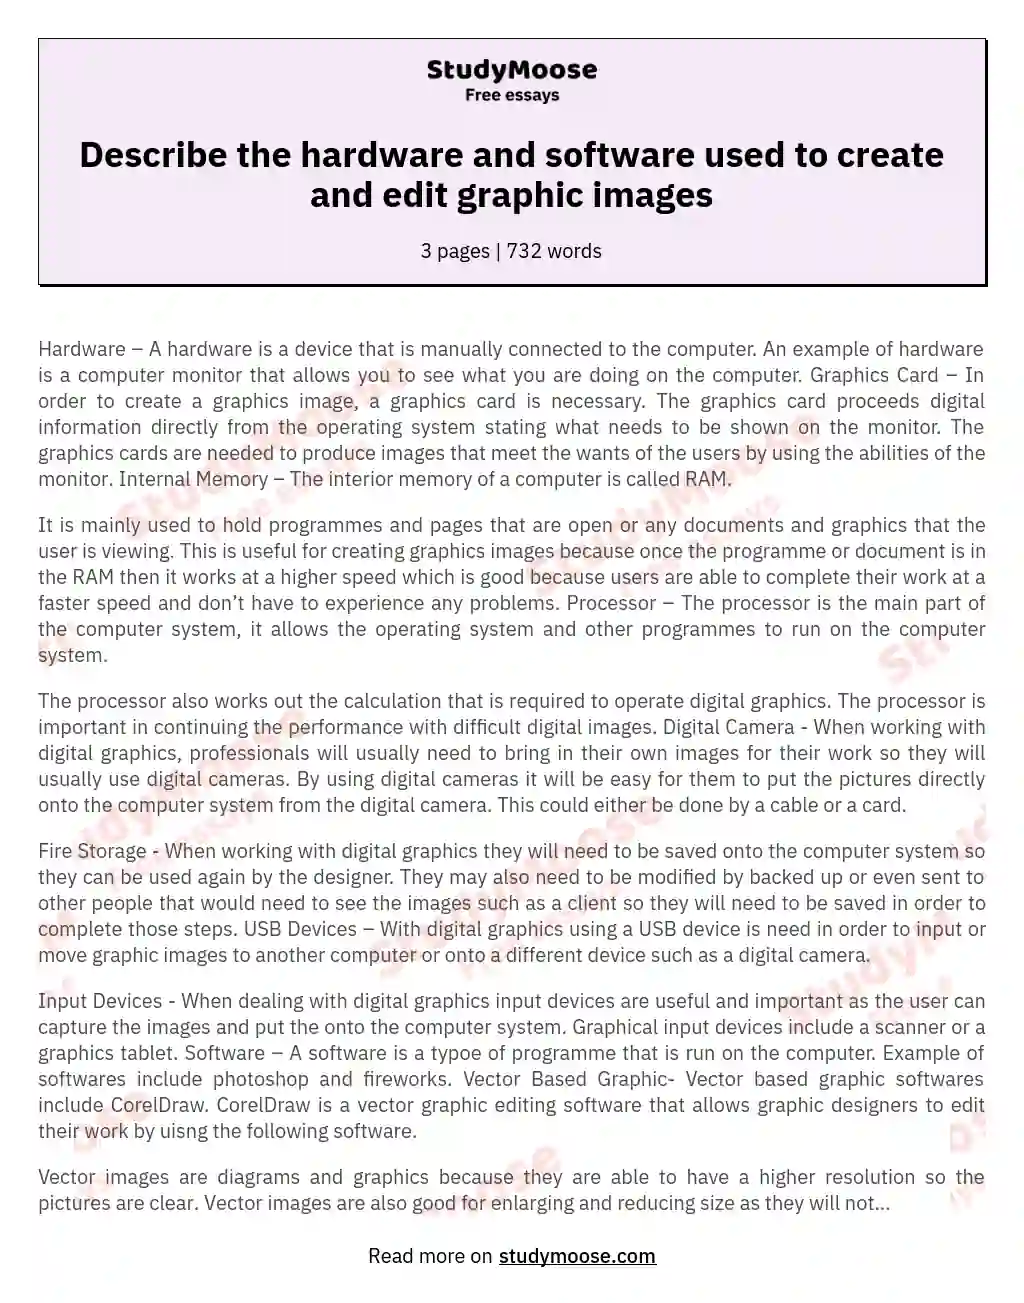 Describe the hardware and software used to create and edit graphic images